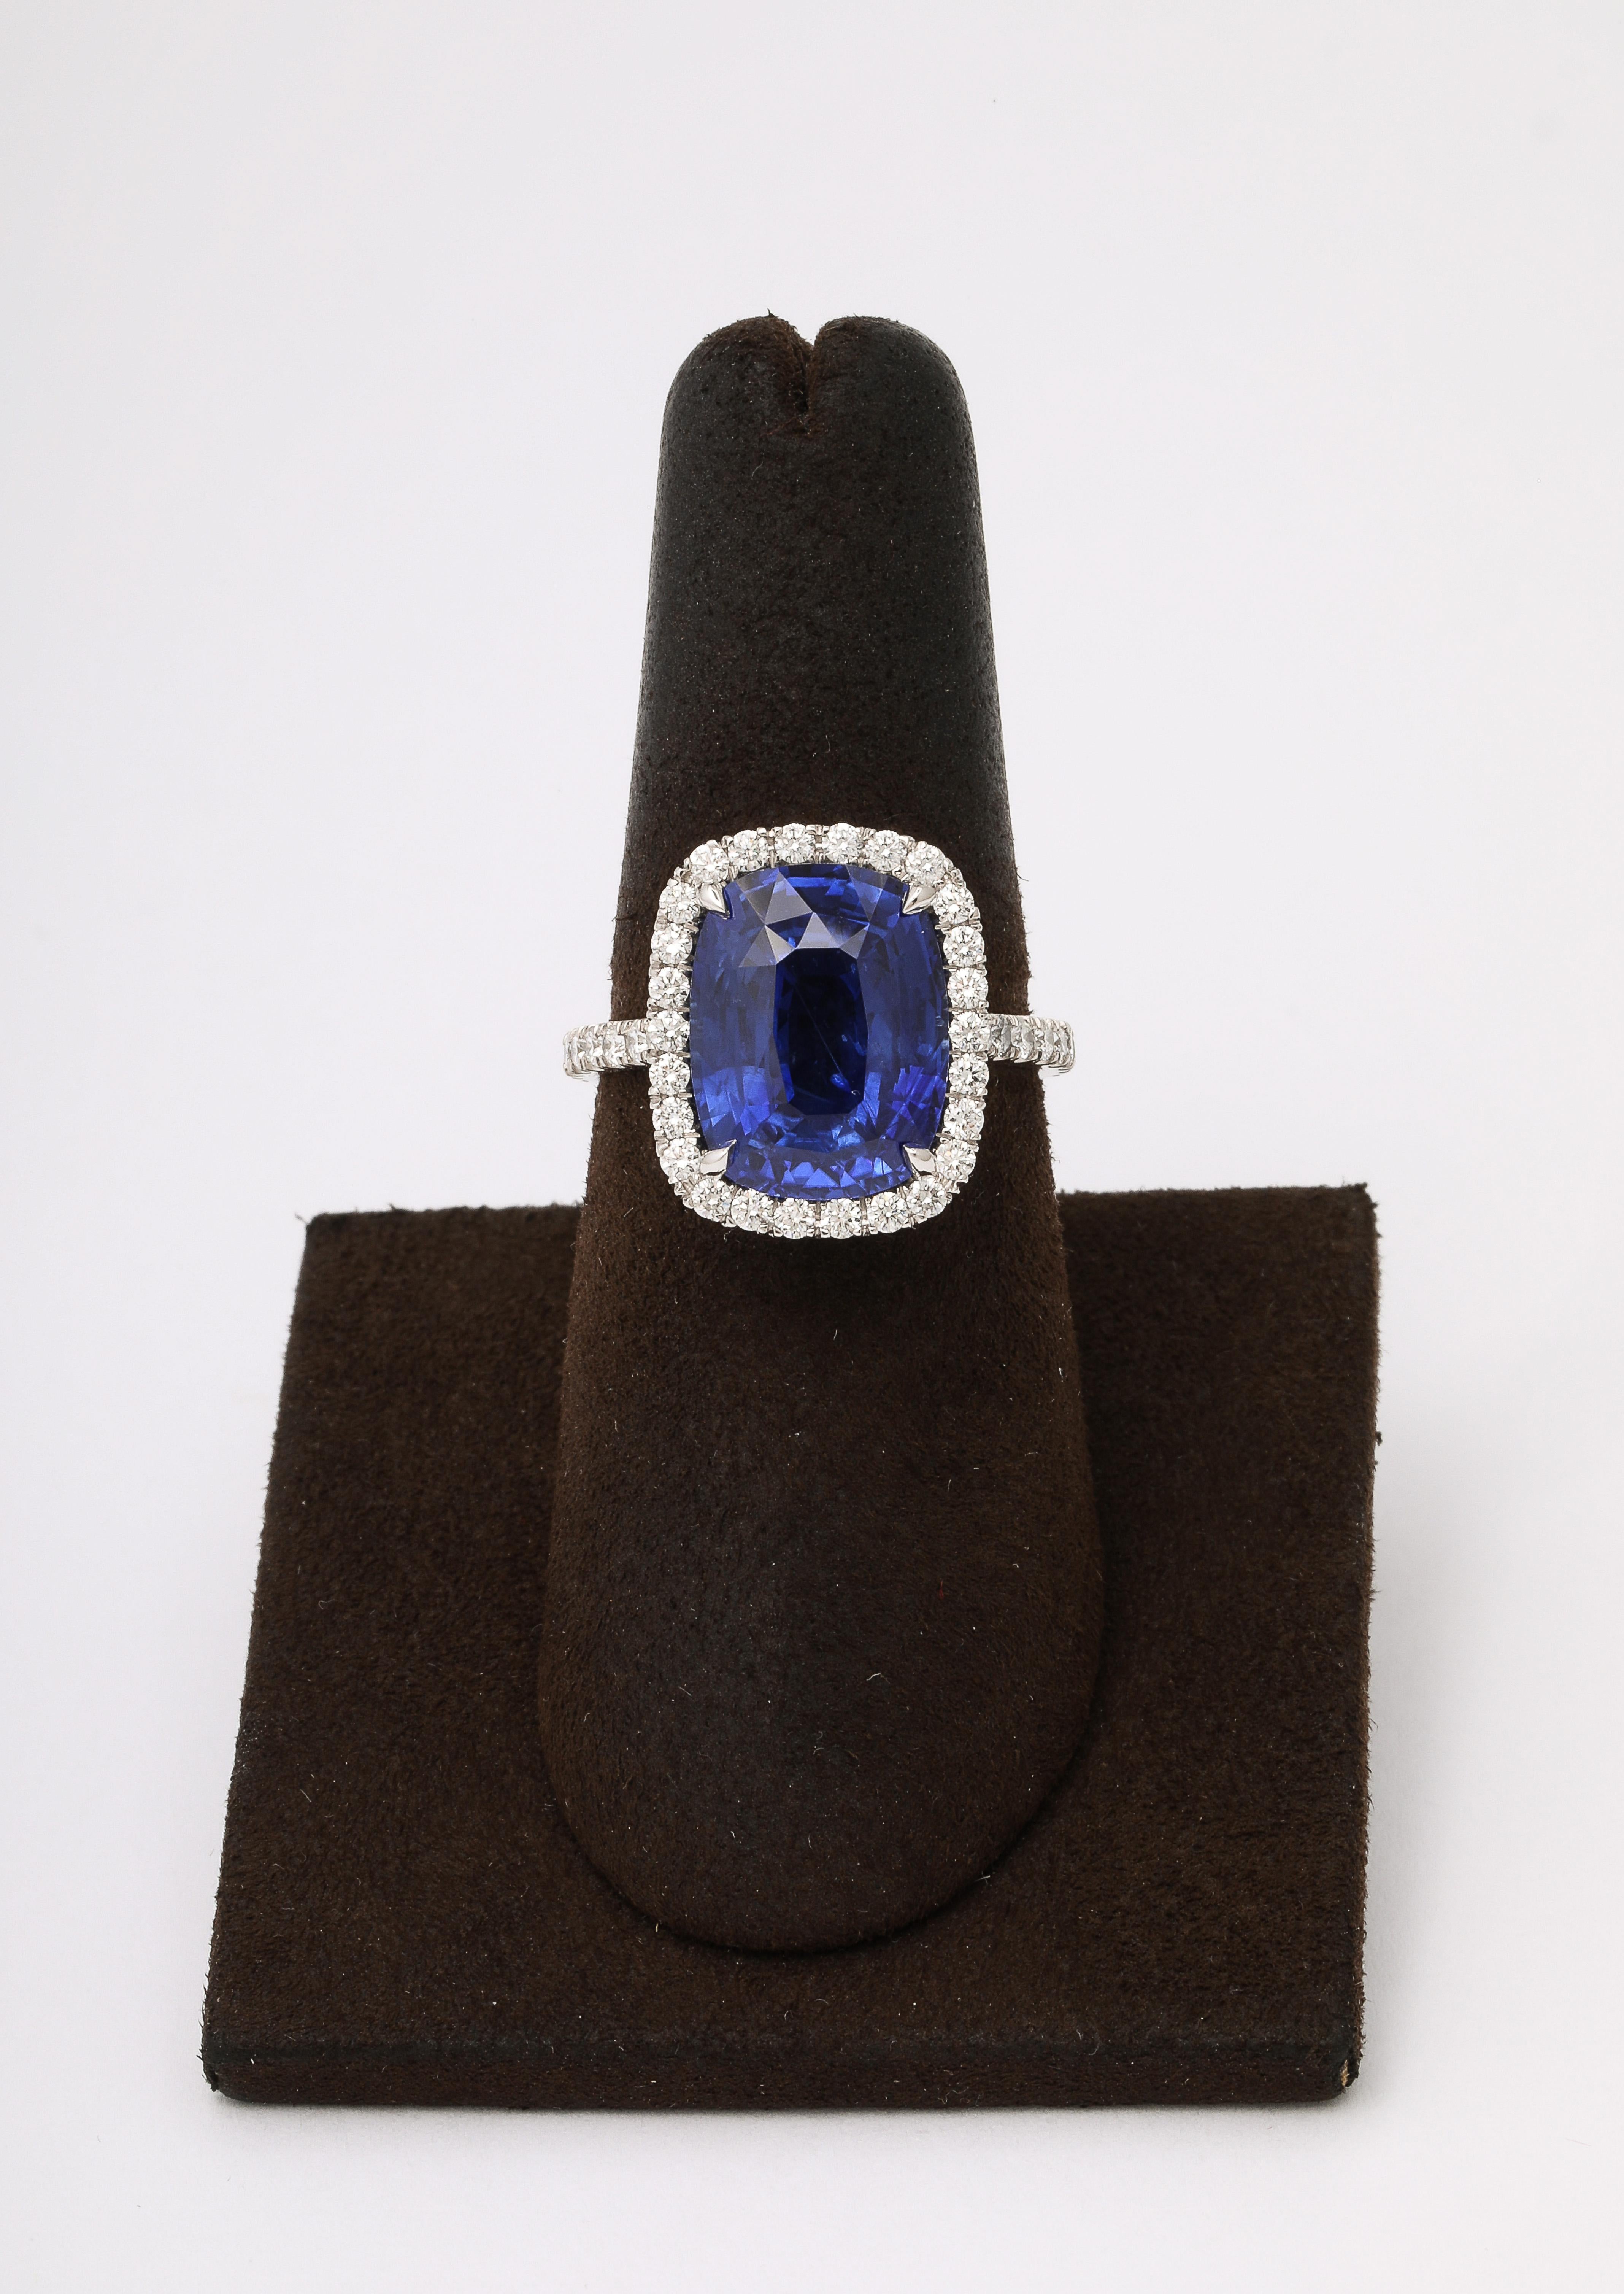 
An INCREDIBLE Sapphire! 

7.94 carat VIVID BLUE Cushion Cut, Ceylon Sapphire.

Set in a custom platinum and diamond mounting featuring .80 carats of white round brilliant cut diamonds.

Currently a size 6.5 - this ring can easily be resized.